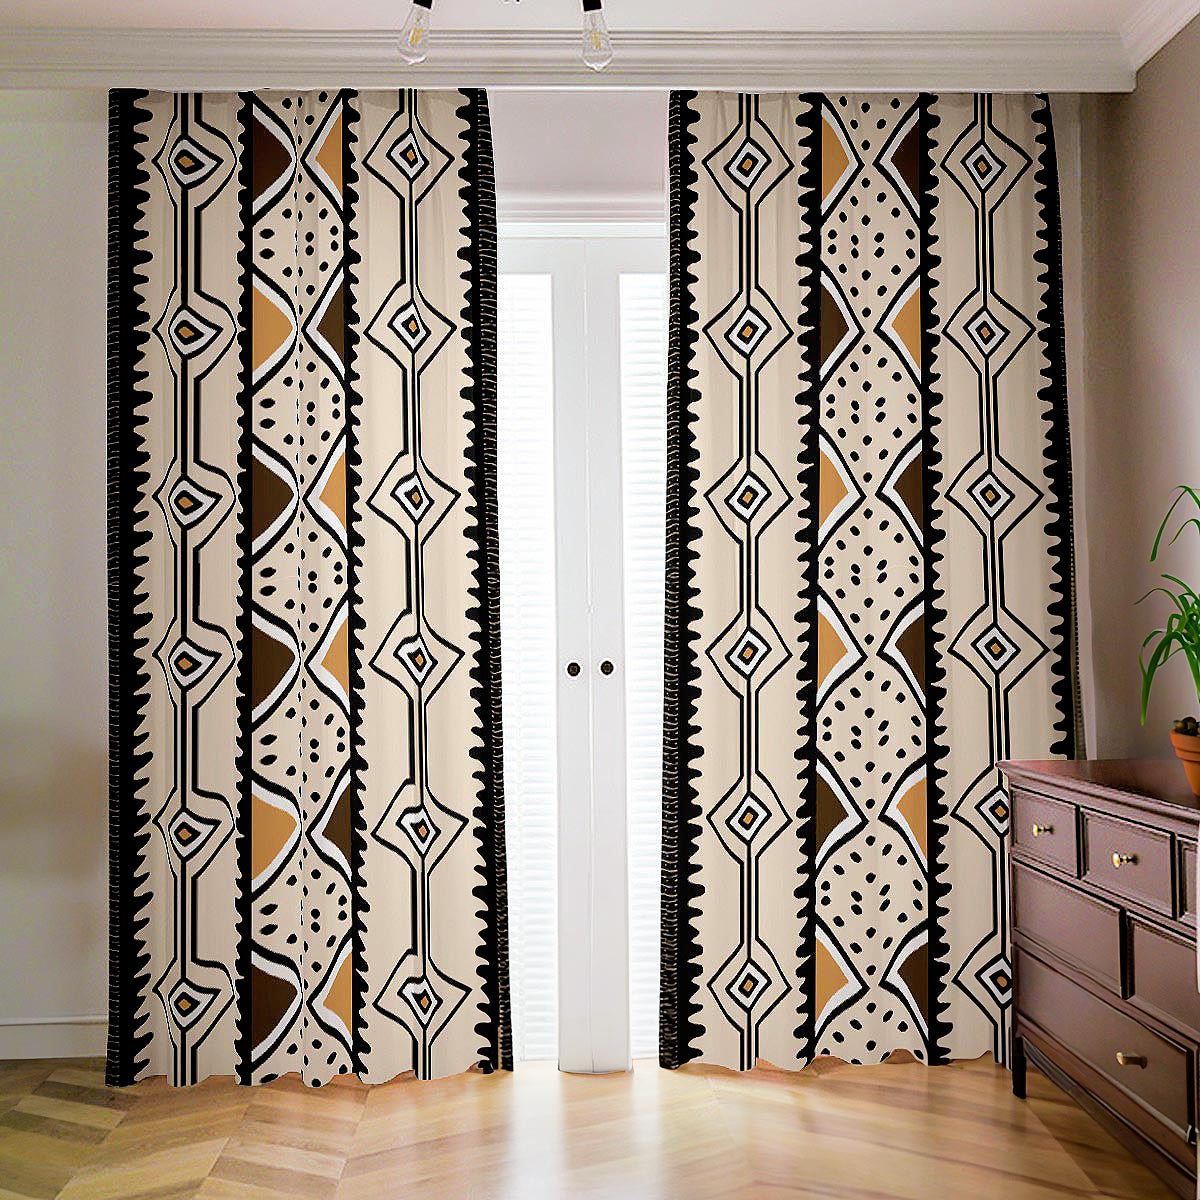 West African Print Curtain Blackout Tribal Pattern - Bynelo